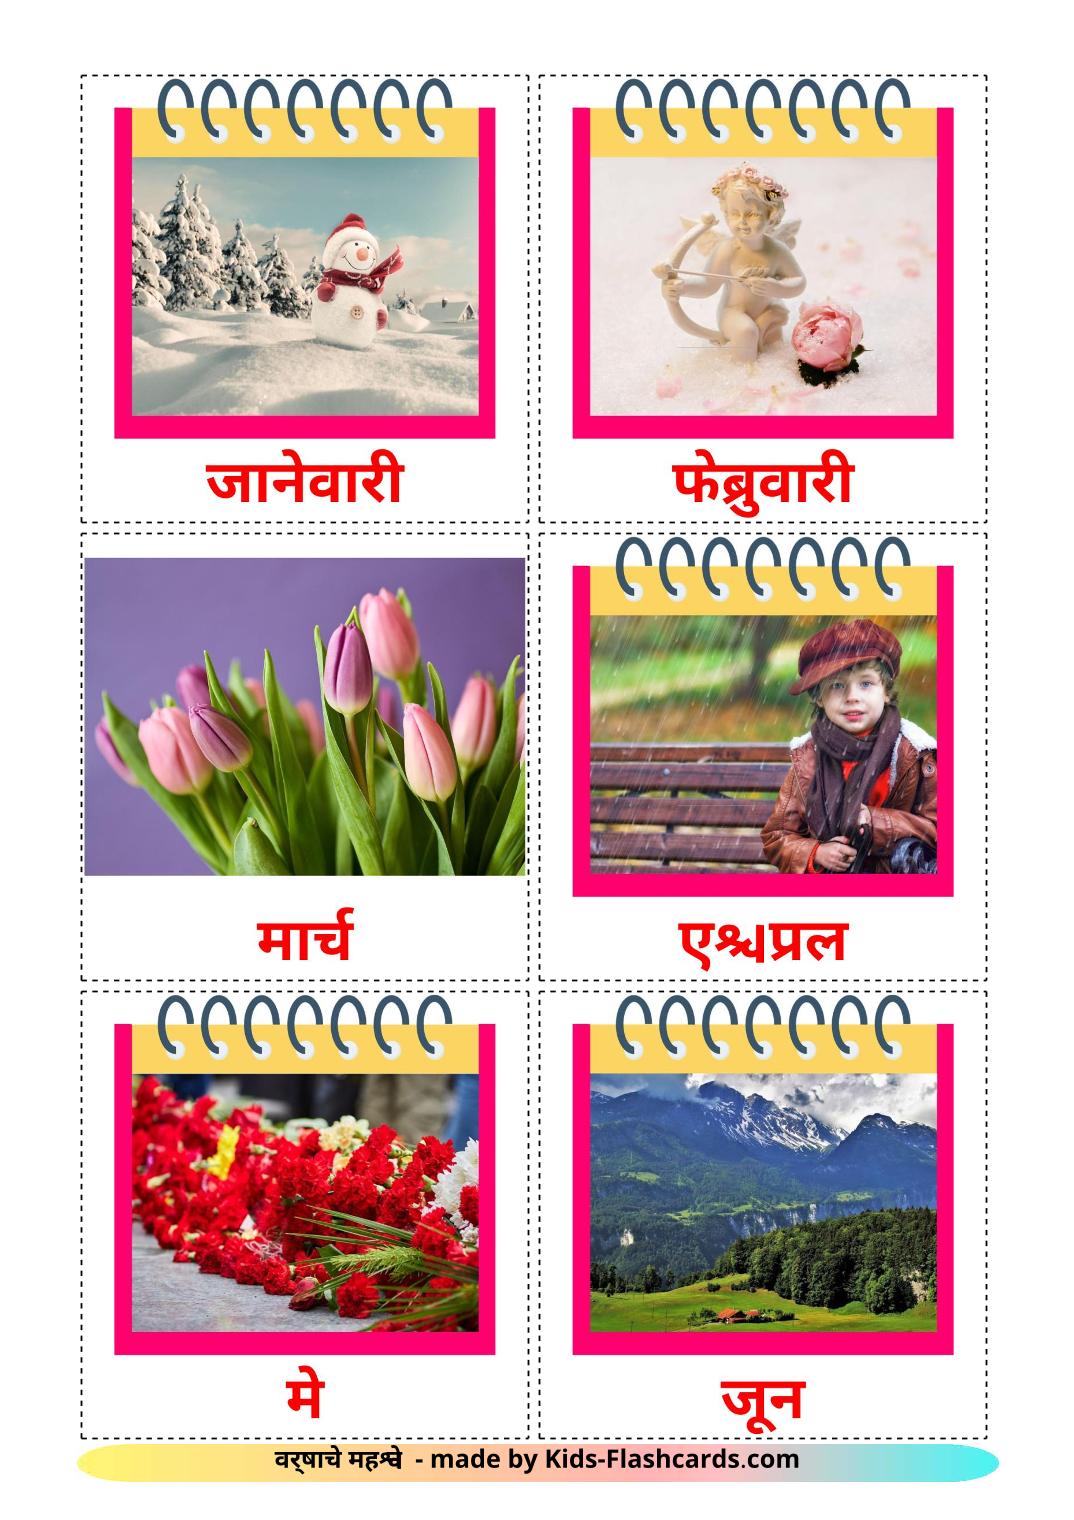 Months of the Year - 12 Free Printable marathi Flashcards 